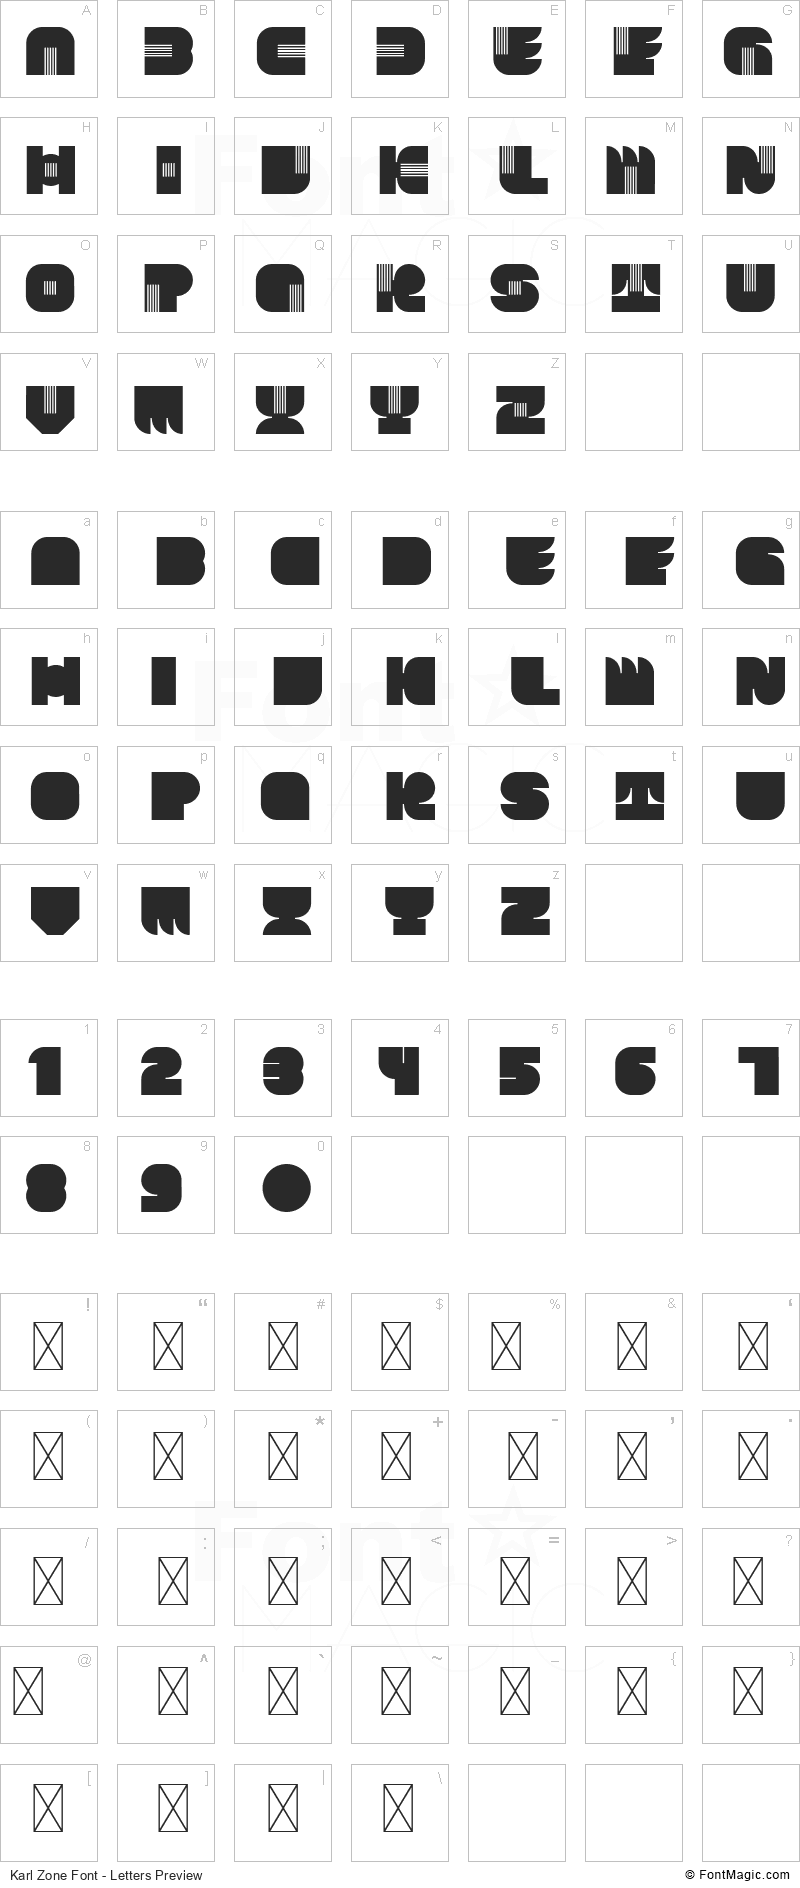 Karl Zone Font - All Latters Preview Chart